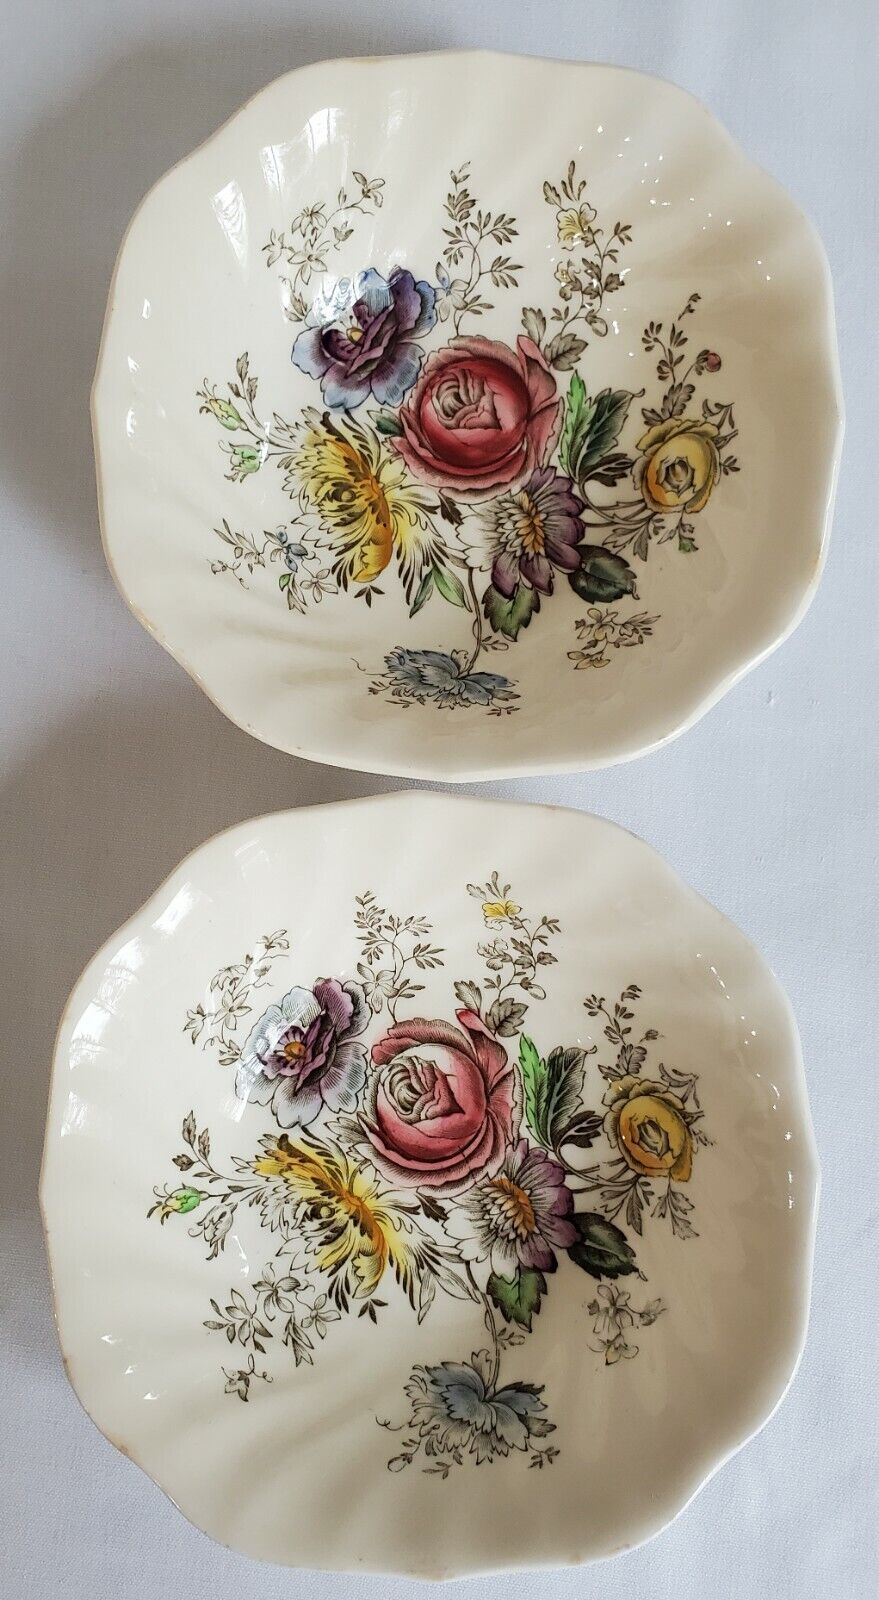 Vintage Johnson Brothers England Sheraton Ironstone Square Cereal Bowls - 2